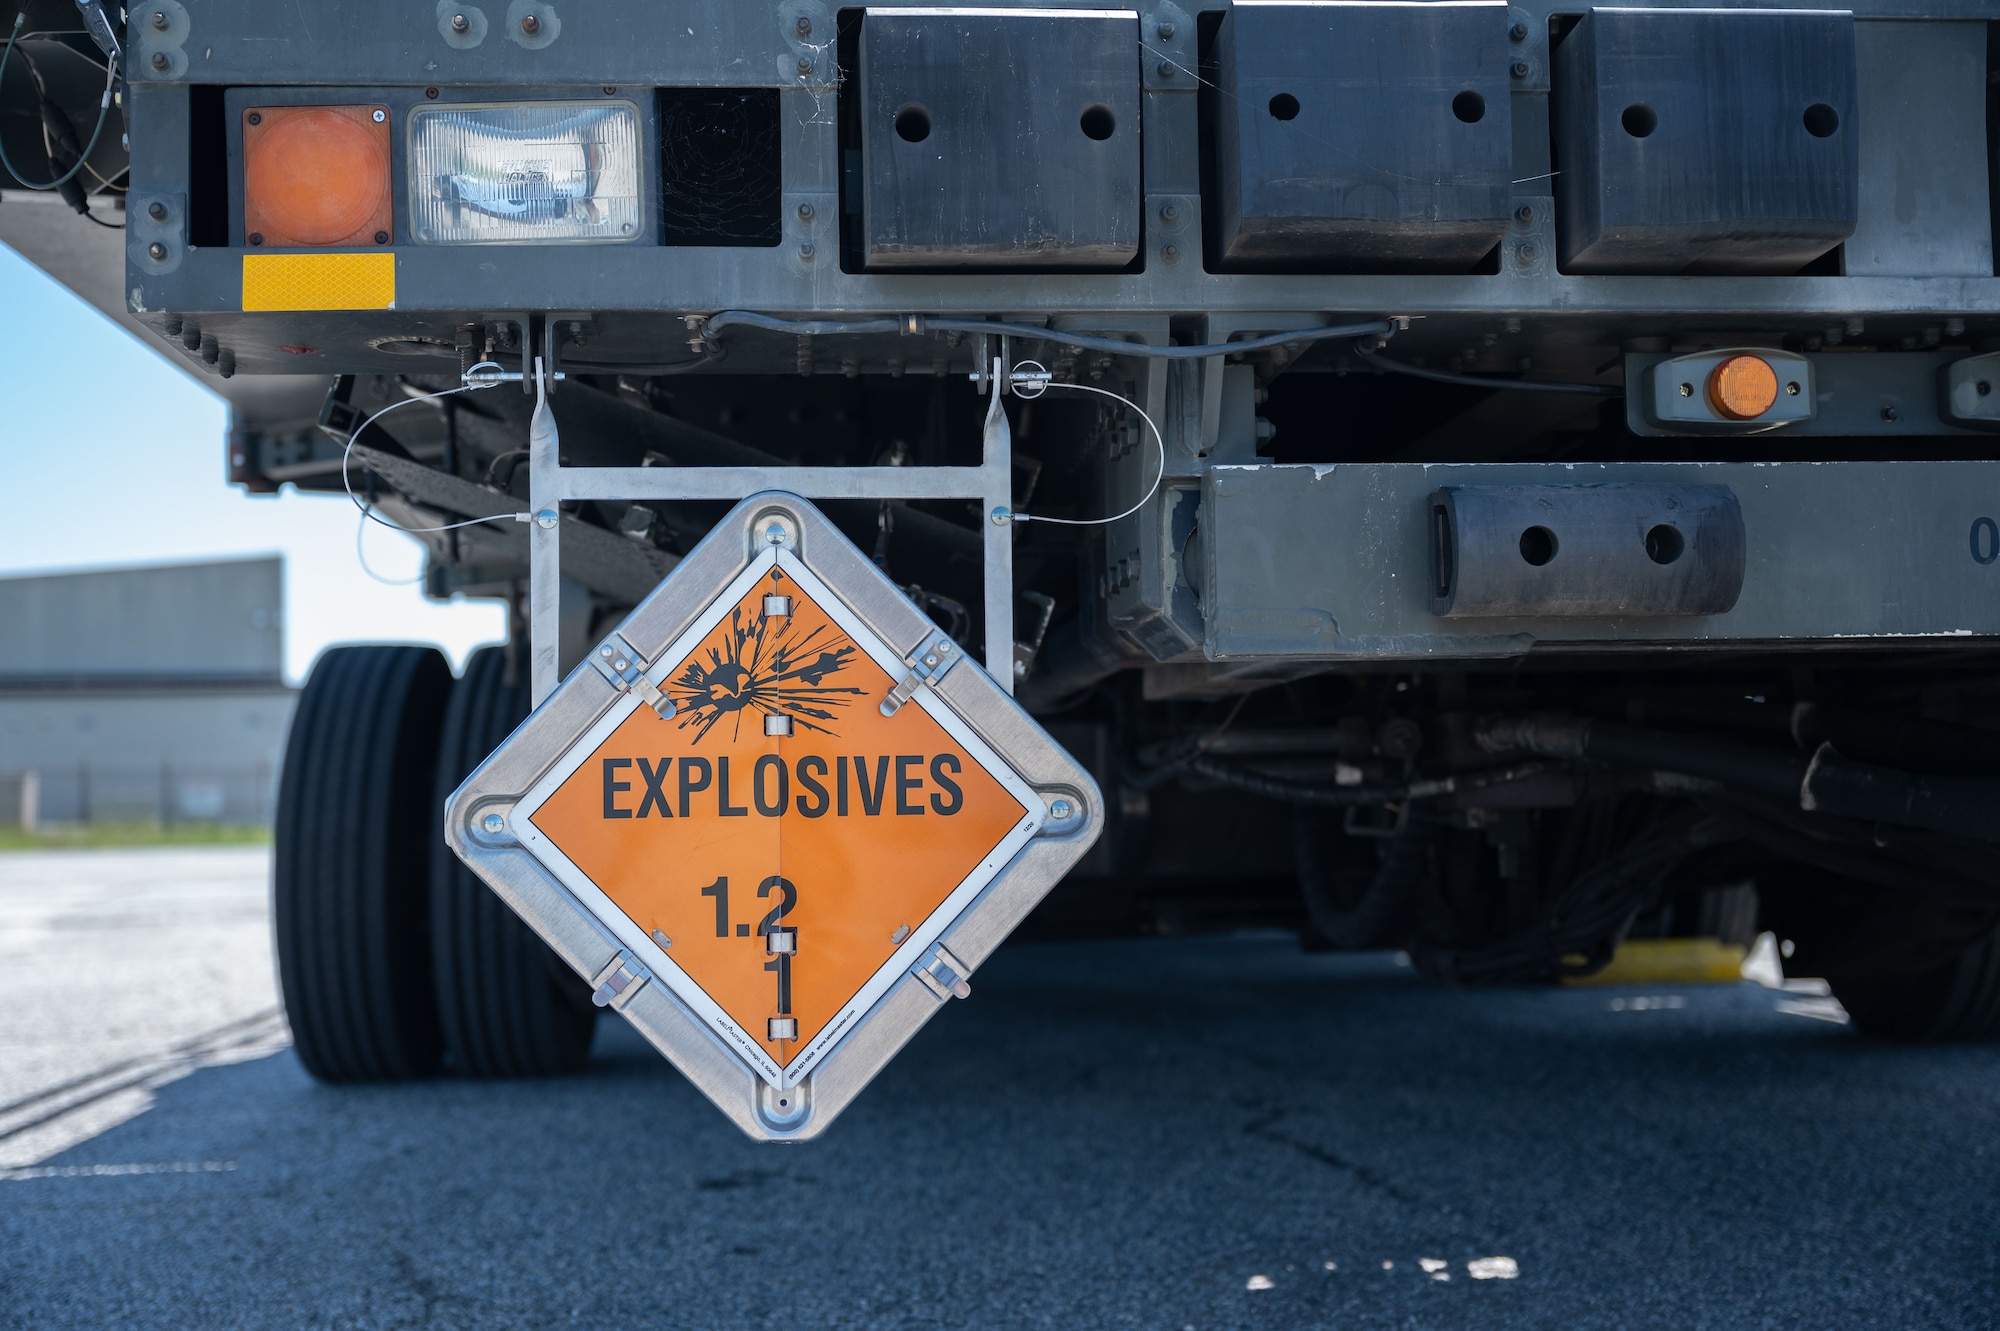 An explosives sign on a K-loader identifies the nature of cargo during a foreign military sales mission between the U.S. and Switzerland at Dover Air Force Base, Delaware, May 14, 2023. The U.S. established diplomatic relations with Switzerland in 1853, following the formation of a unified Swiss state. (U.S. Air Force photo by Senior Airman Cydney Lee)